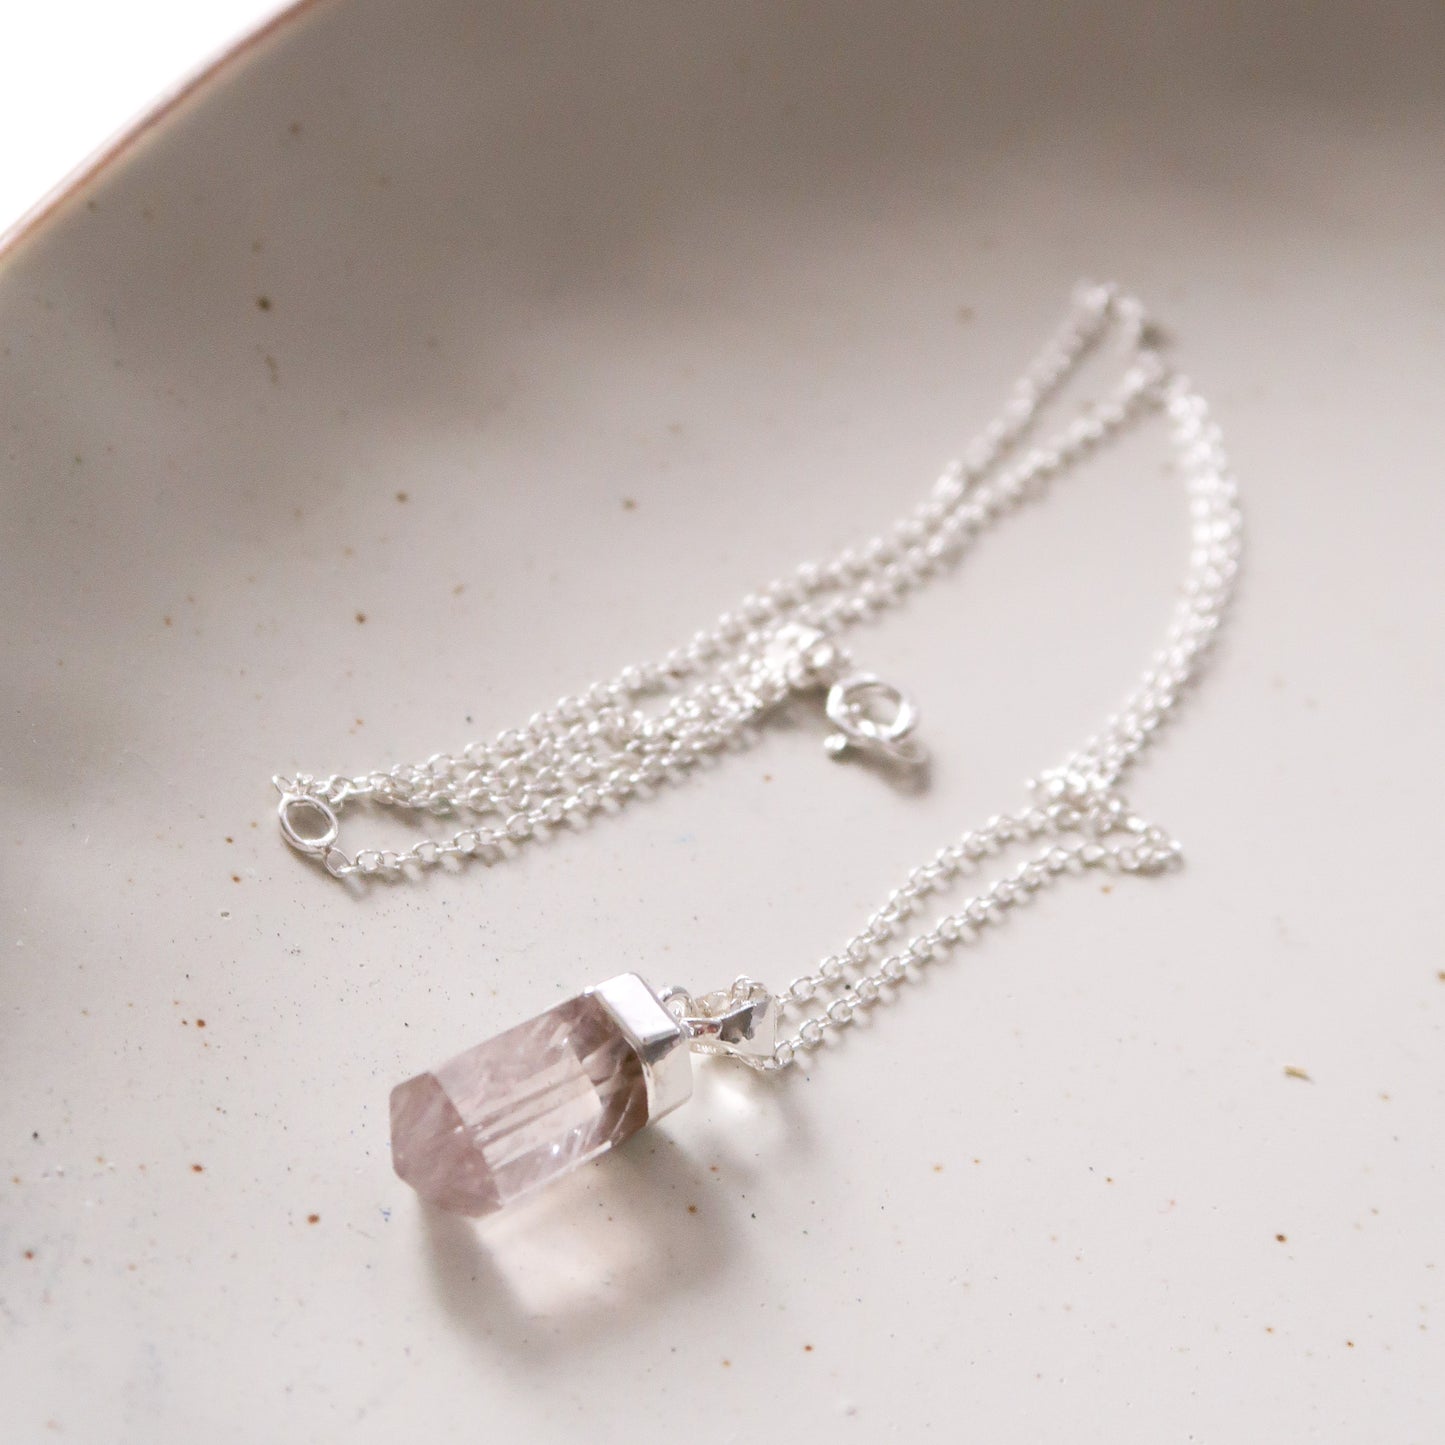 Small Pink Rose Quartz Polished Crystal Point Pendant With 925 Sterling Silver Necklace Chain